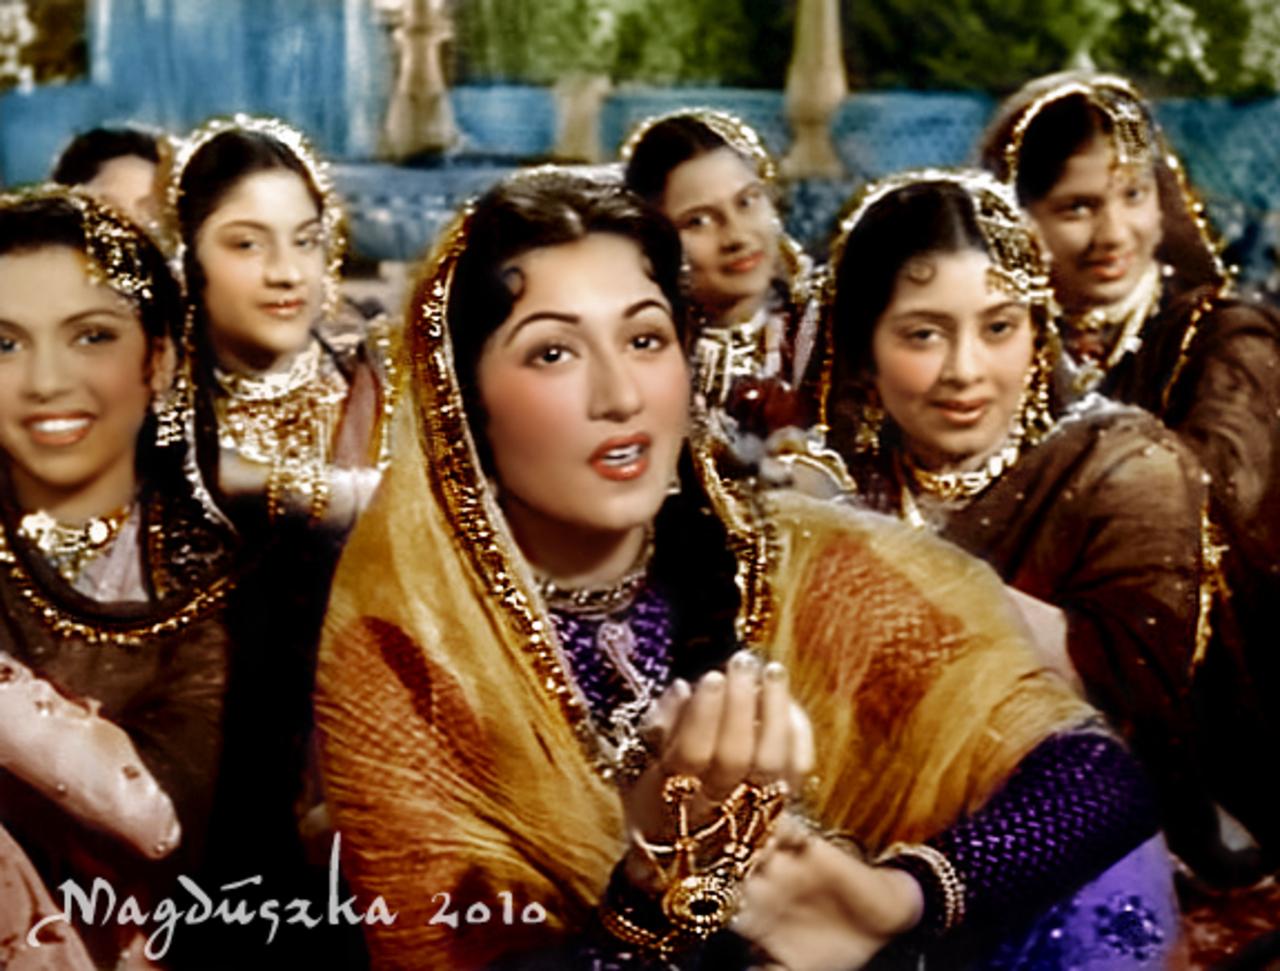 'Mughal-e-Azam' popularized the anarkali outfits, paired with lavish Mughal-inspired jewelry, encapsulating pure grandeur and theatricality. Madhubala's ethereal beauty set a gold standard, and her on-screen style became a sought-after trend that many aspired to replicate.